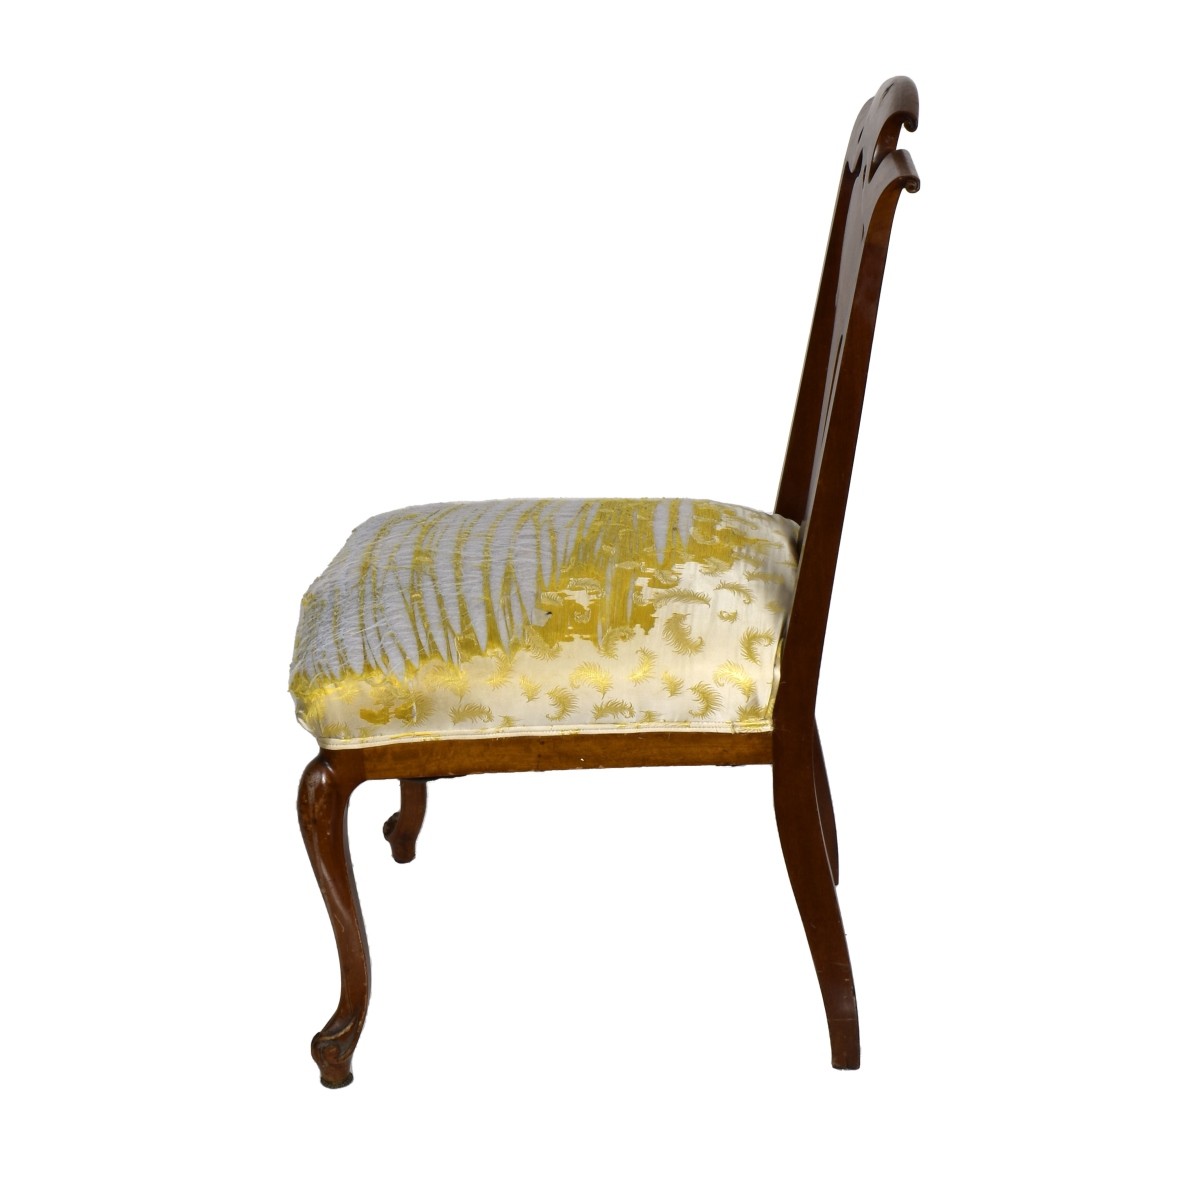 English Wood Scrolled Inlaid Side Chair